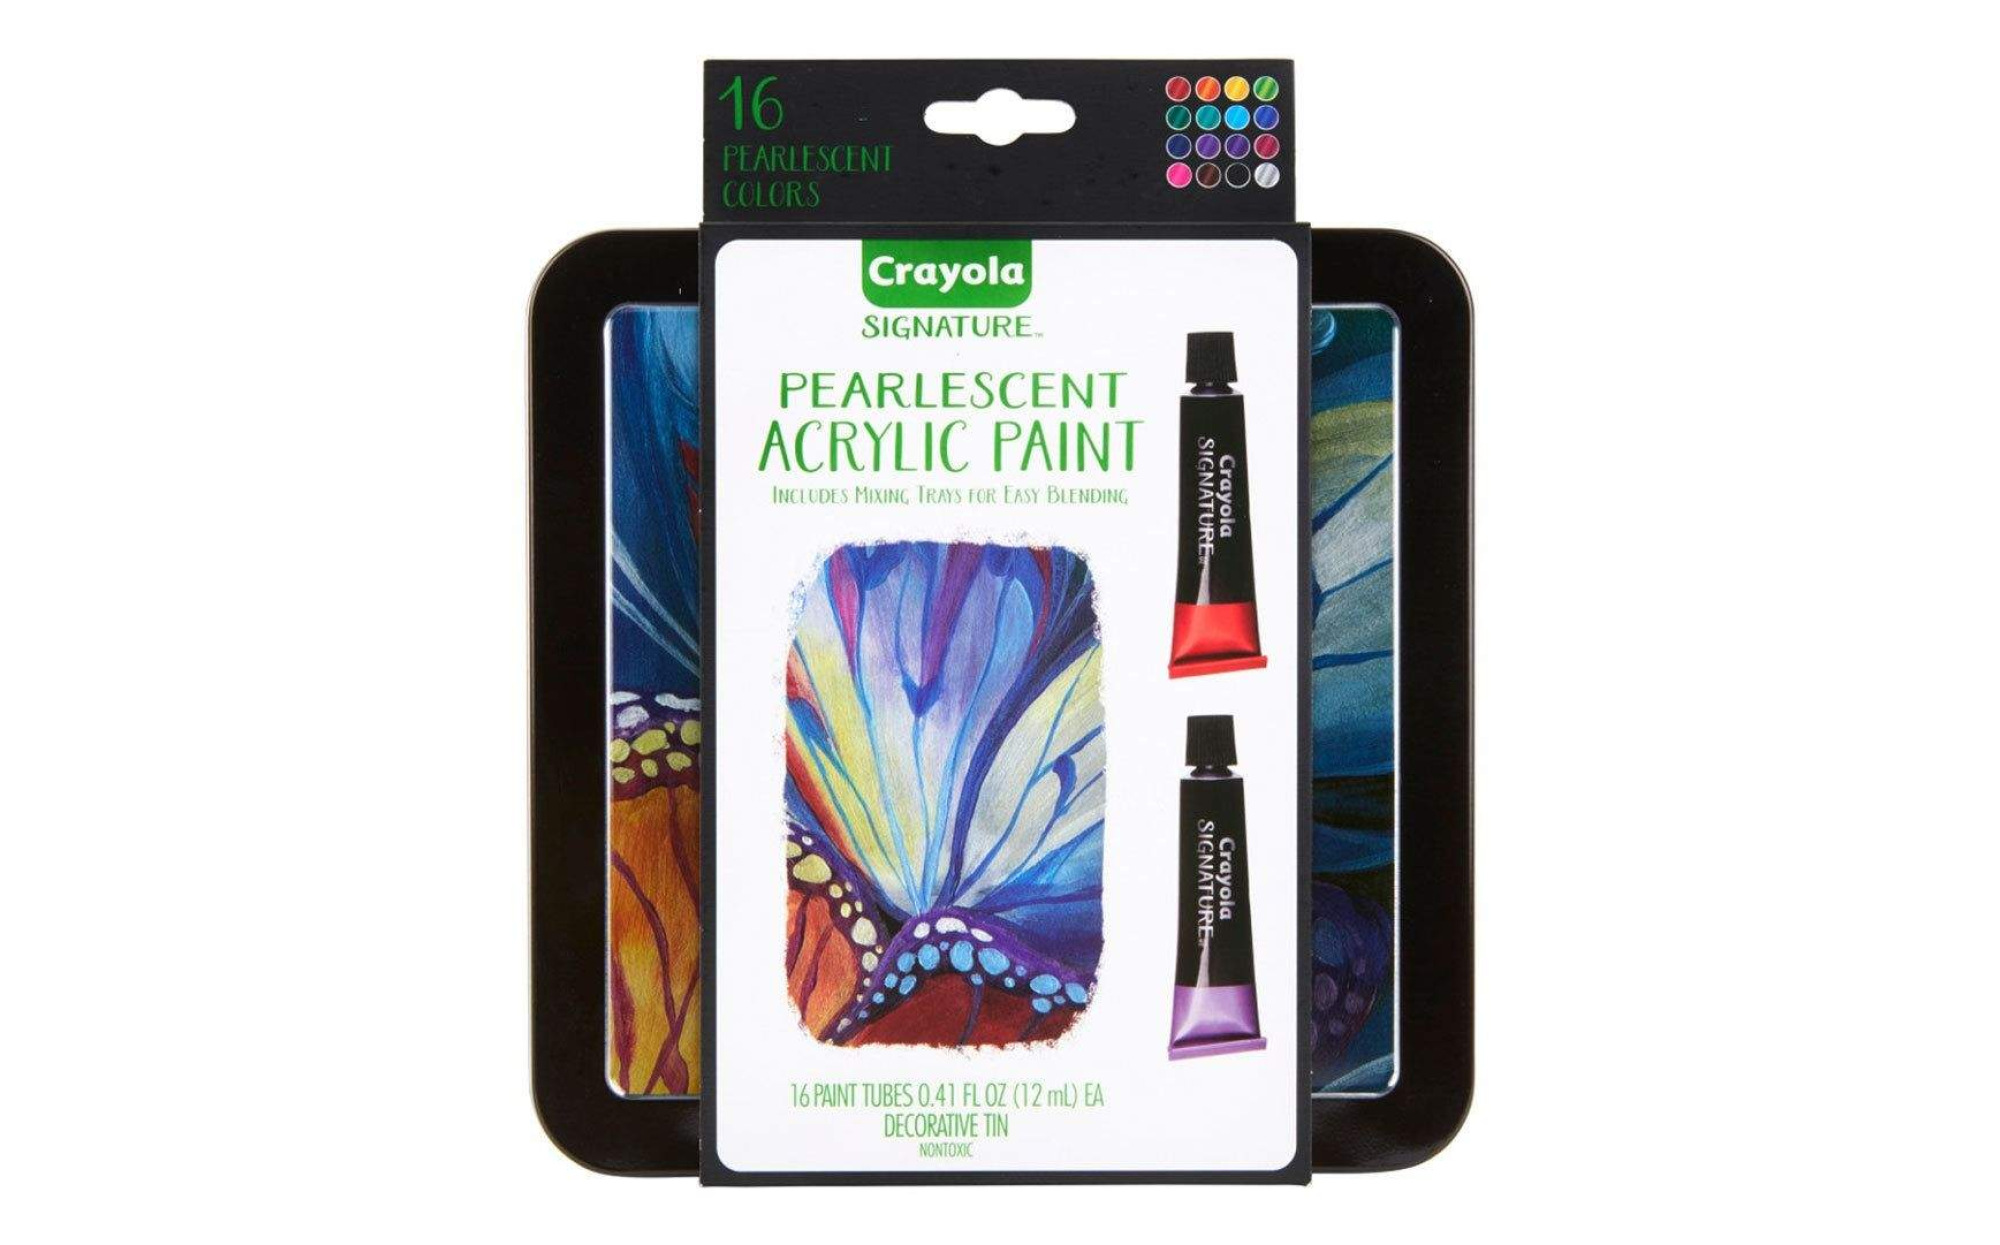 Crayola Multi-Surface Acrylic Paint Set, 4-Colors, Primary Colors